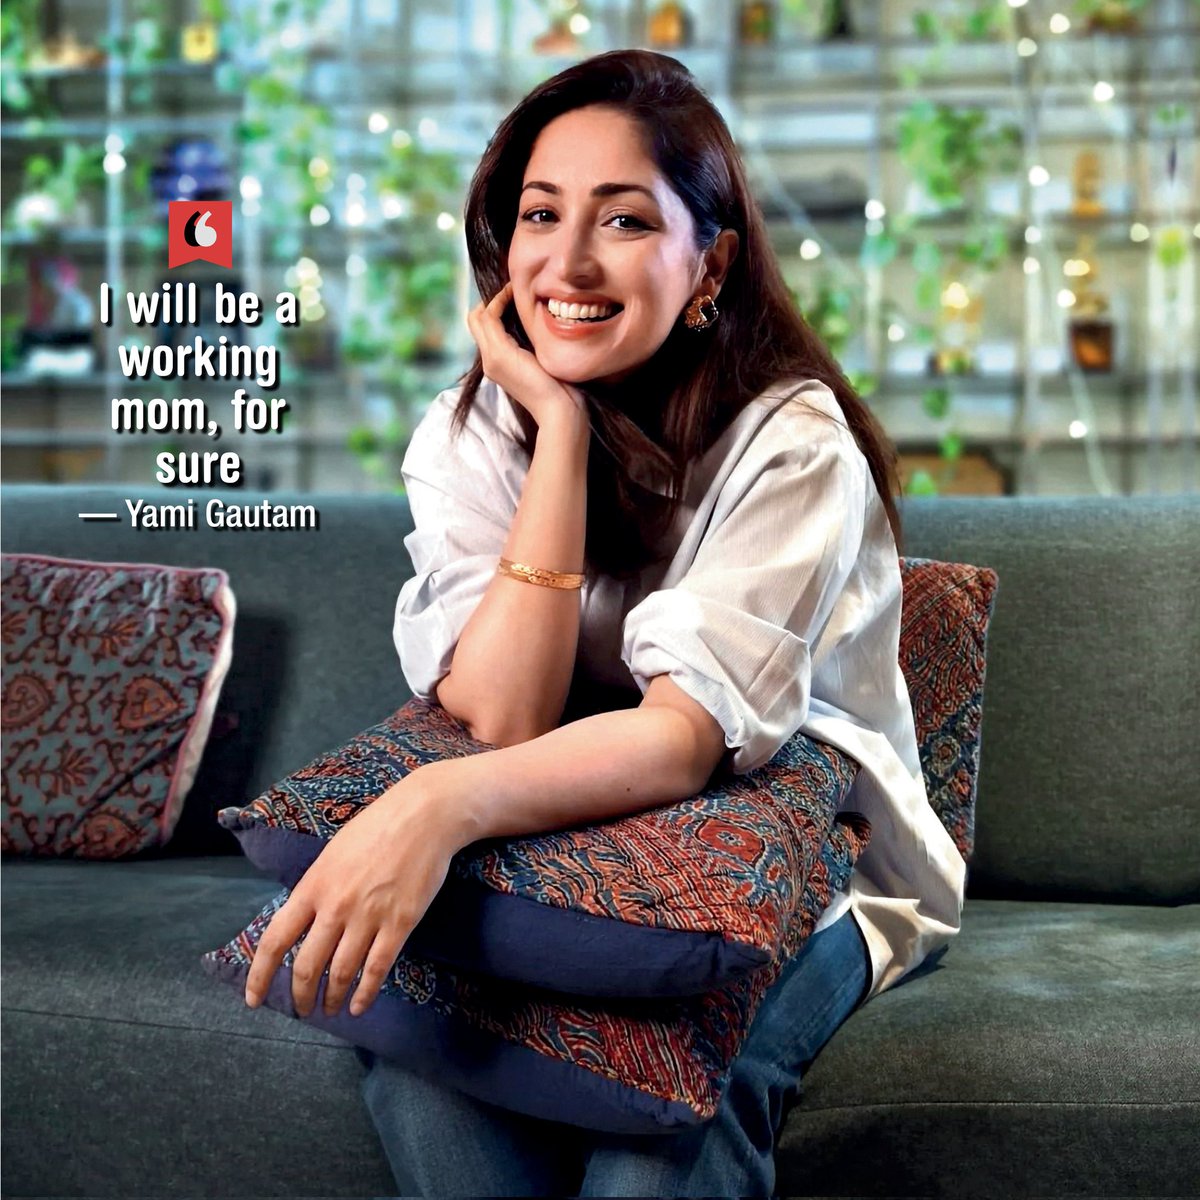 .@yamigautam talks about her pregnancy, says she’s going to be a working #mom for sure. 'My mother and mother-in-law have been working women and have balanced it well. They have set an example for me,' she says Read: tiny.cc/3rzvxz #Motherhood #YamiGautam, #Bollywood